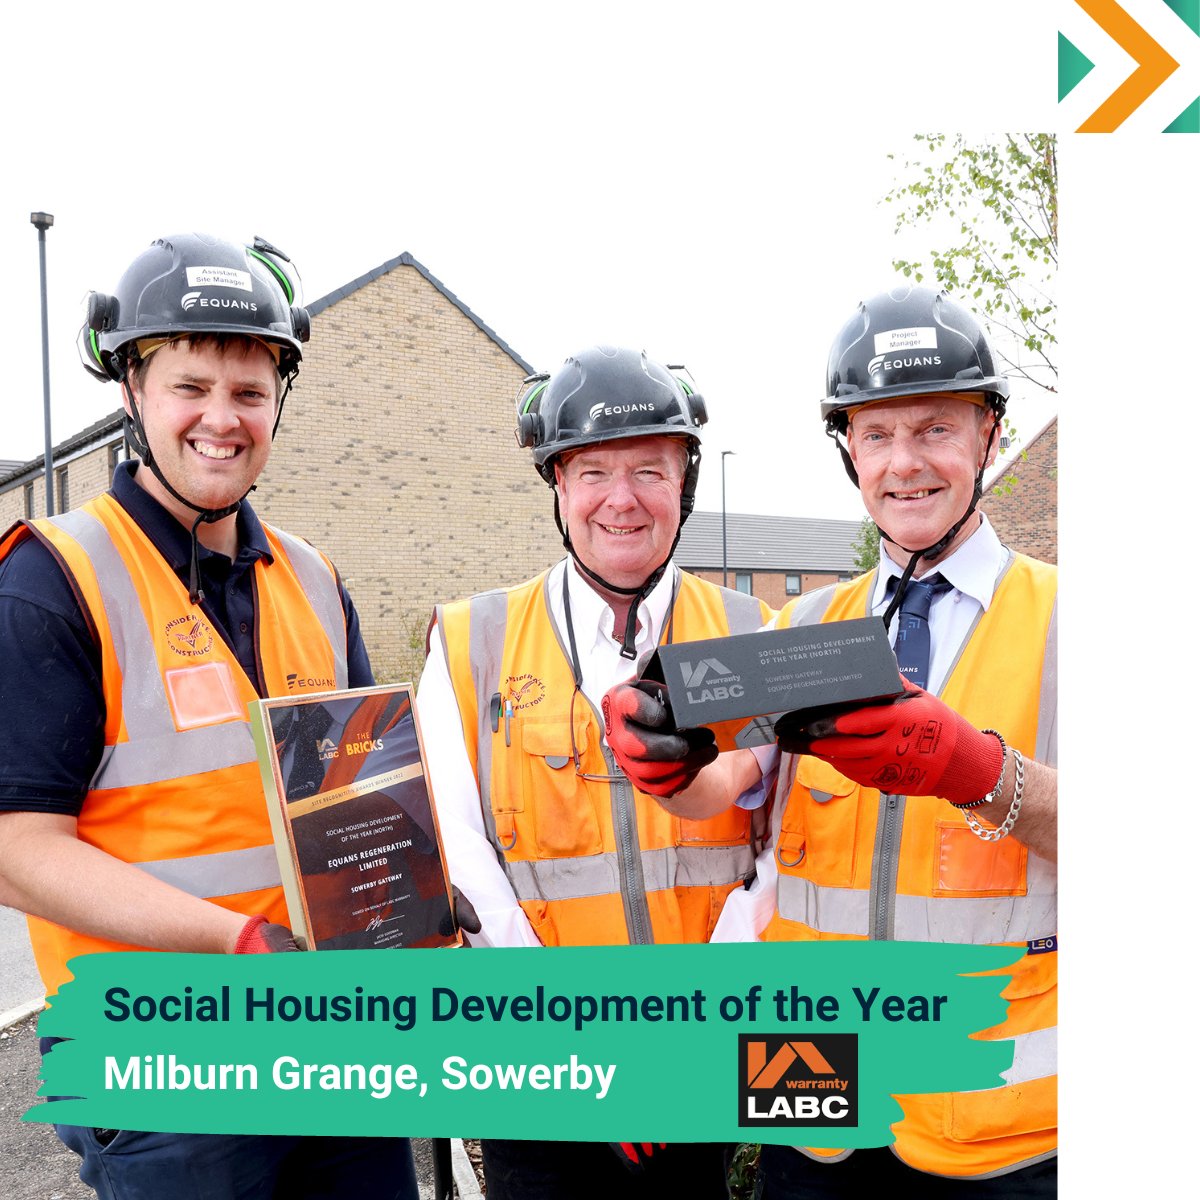 We're delighted that our Milburn Grange development has won a prestigious award from the @labcuk or being one of the highest quality developments in the North of the UK 🏆

Well done to all involved!

#AwardWin #ConstructionAward #EmpoweringTransitions